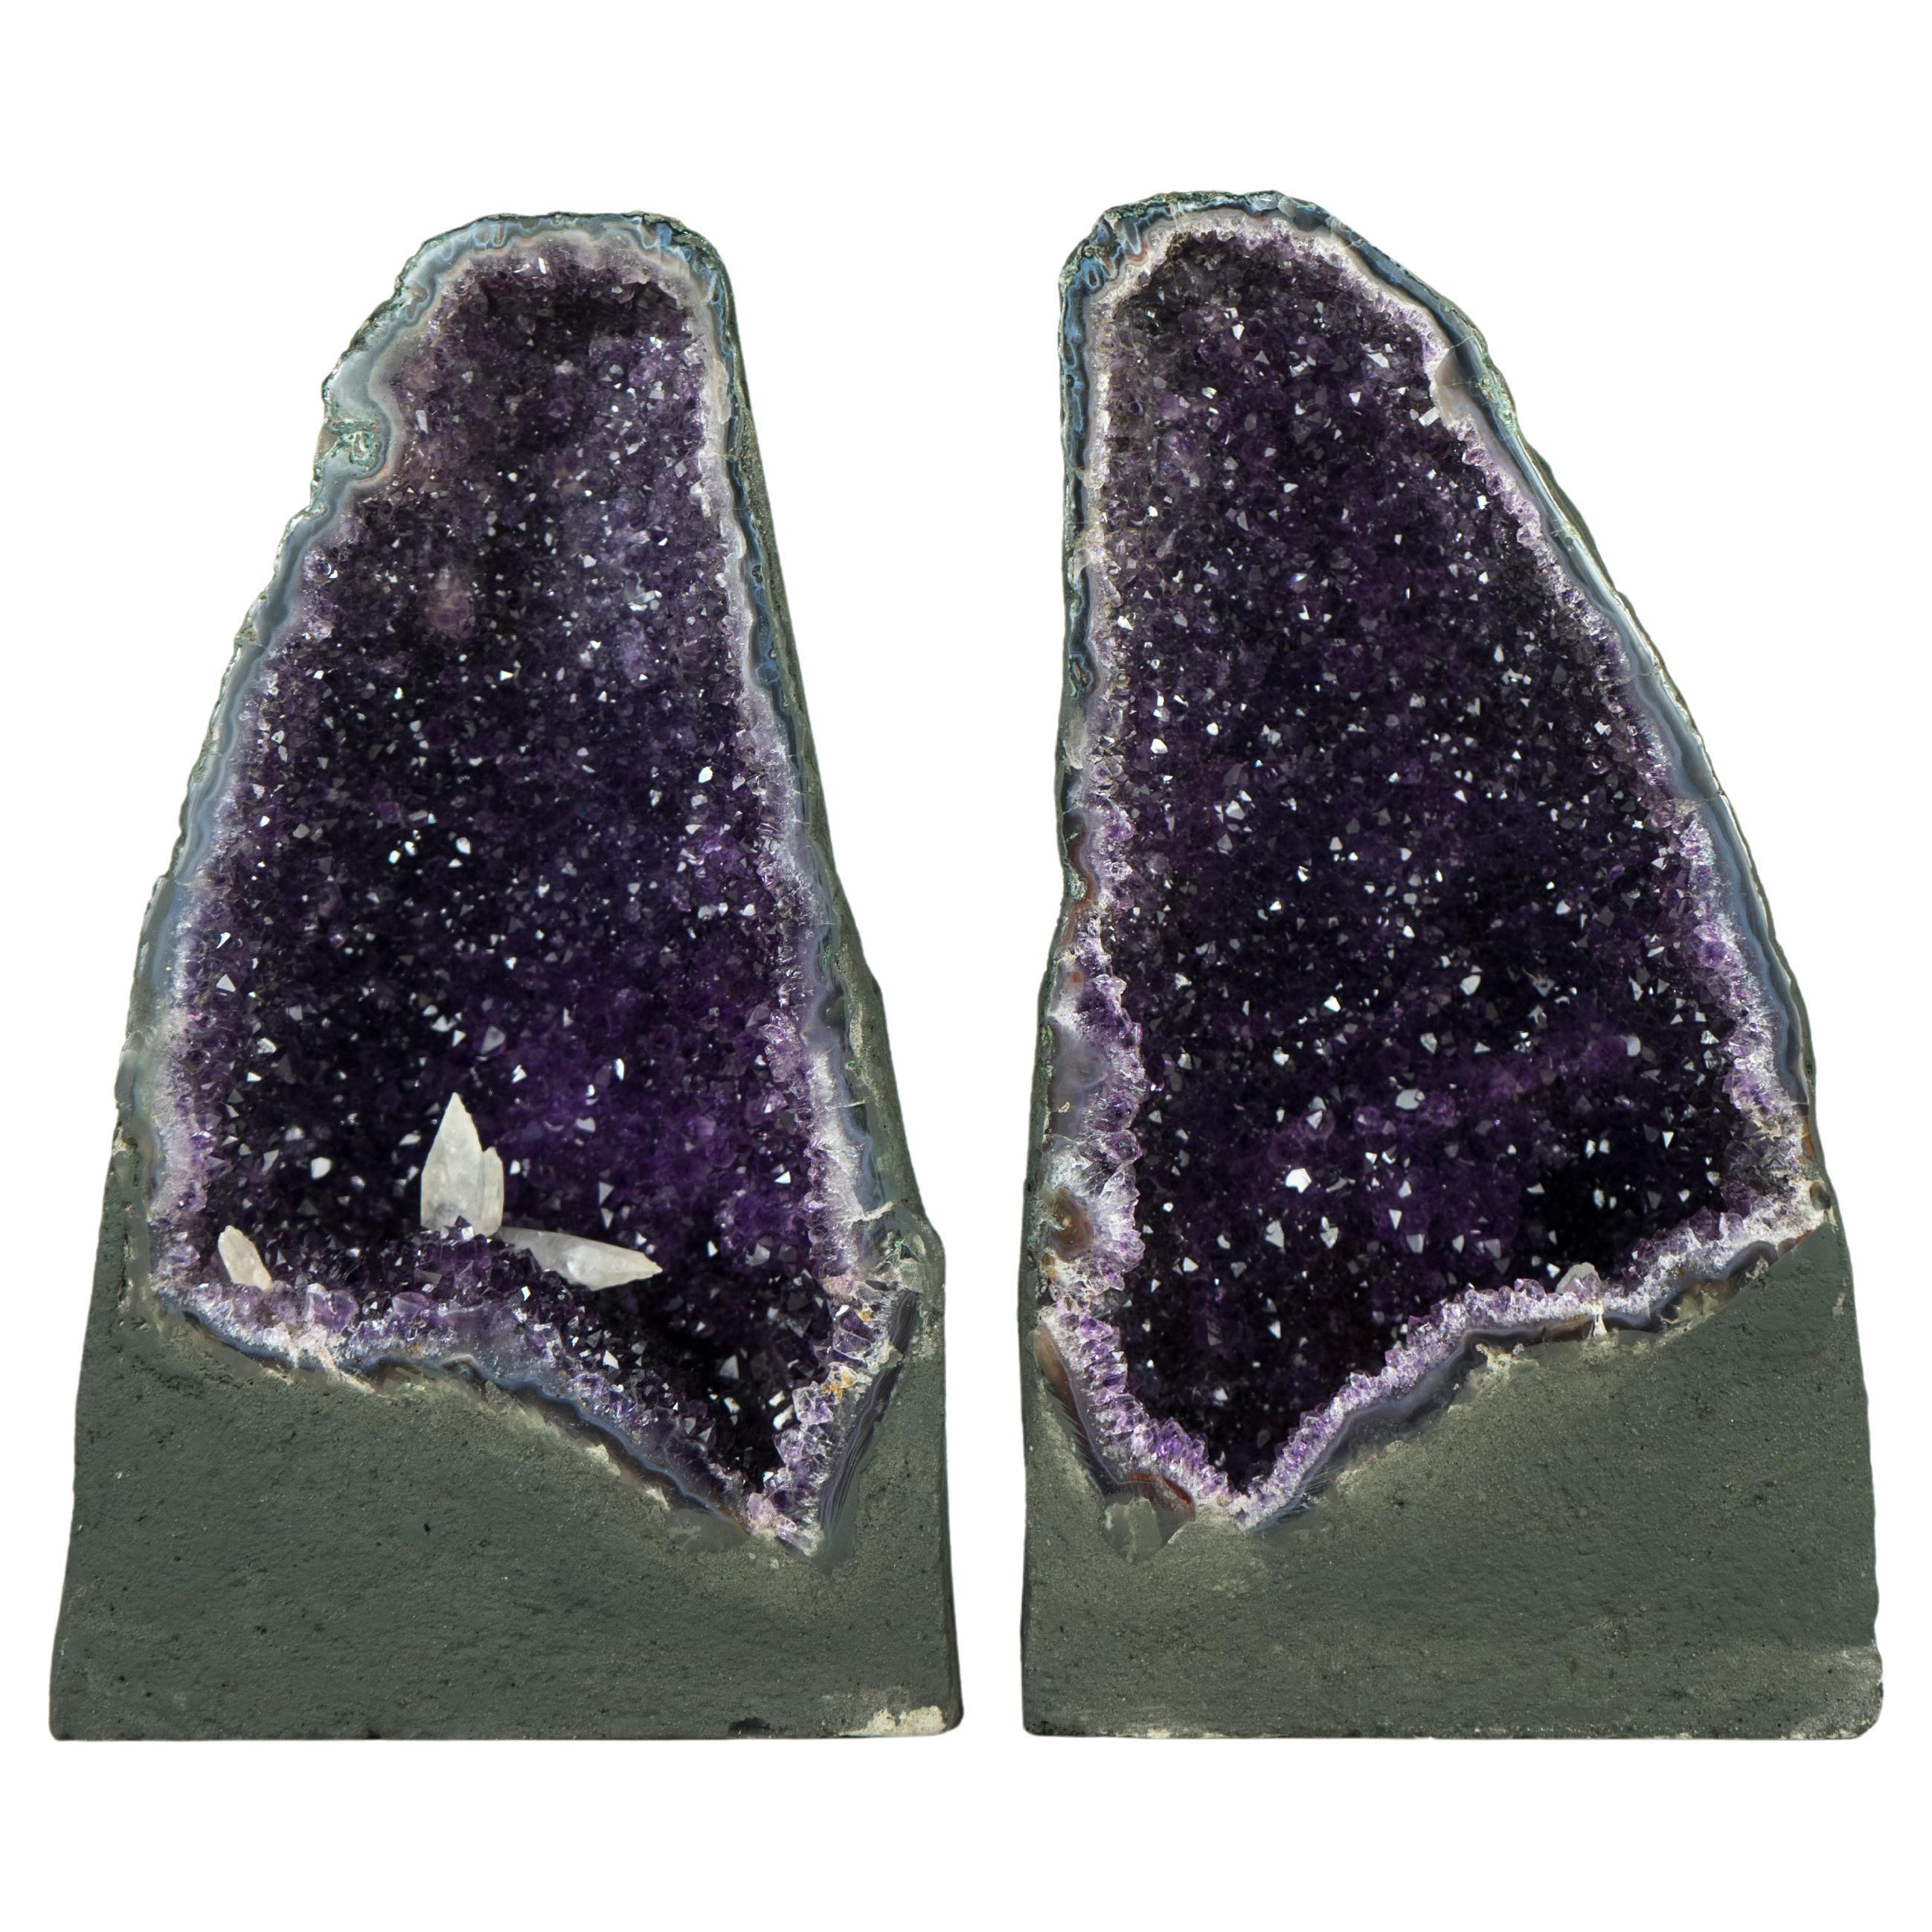 All-Natural Amethyst Geodes with Intact Calcite and Rich Purple Galaxy Amethyst  For Sale